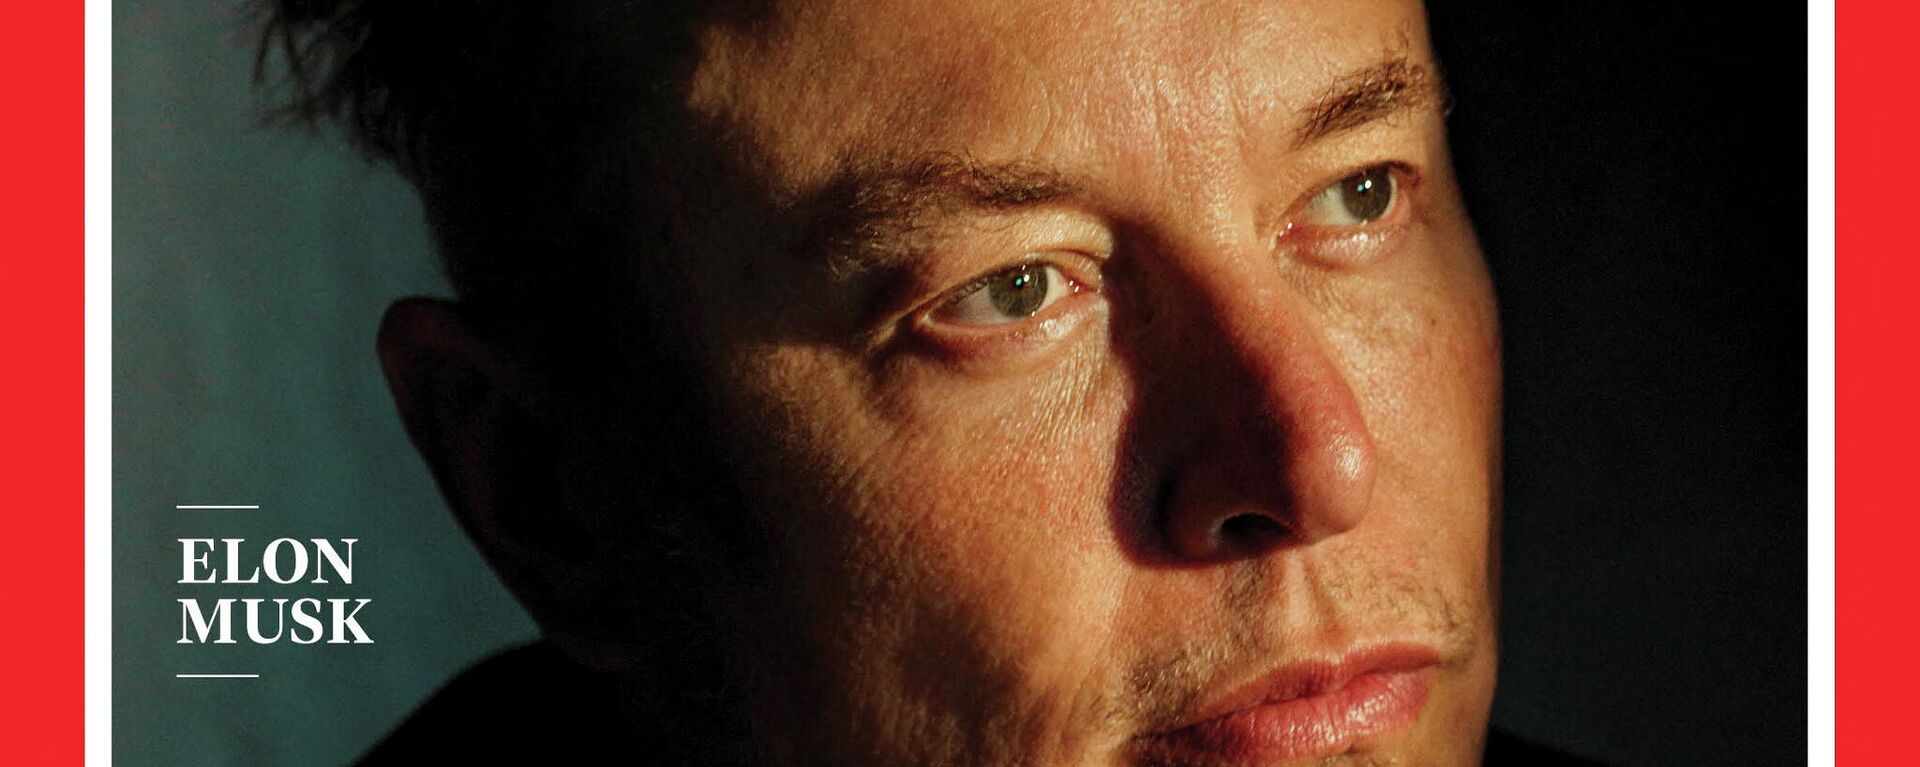 Elon Musk, founder and CEO of rocket company SpaceX and Tesla Chief Executive Officer, poses on the cover image of Time magazine's 2021 Person of the Year edition released in New York City, U.S. December 13, 2021. - Sputnik International, 1920, 13.12.2021